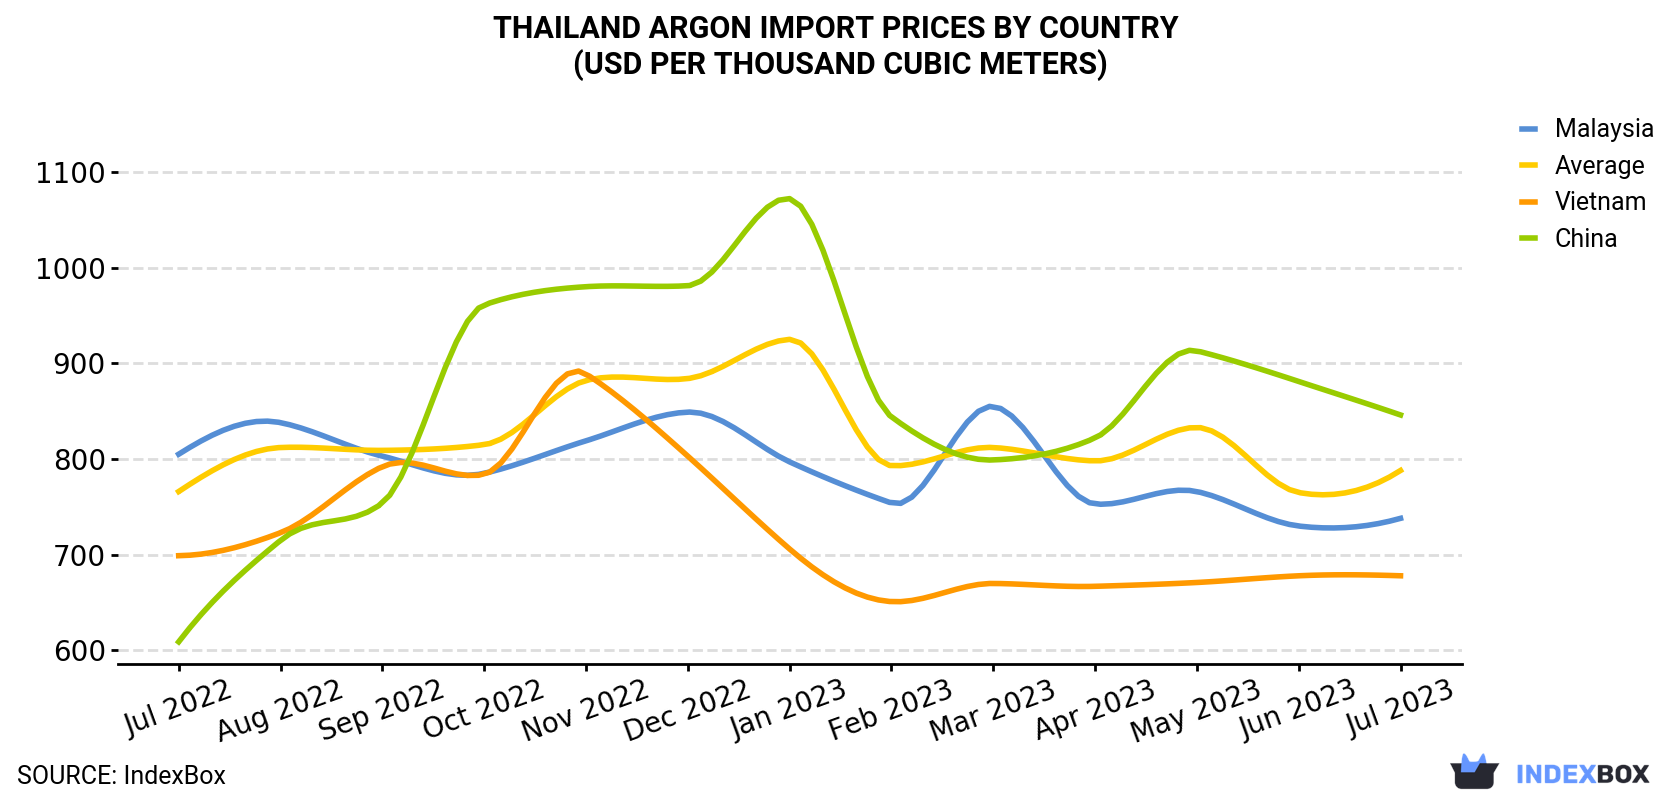 Thailand Argon Import Prices By Country (USD Per Thousand Cubic Meters)